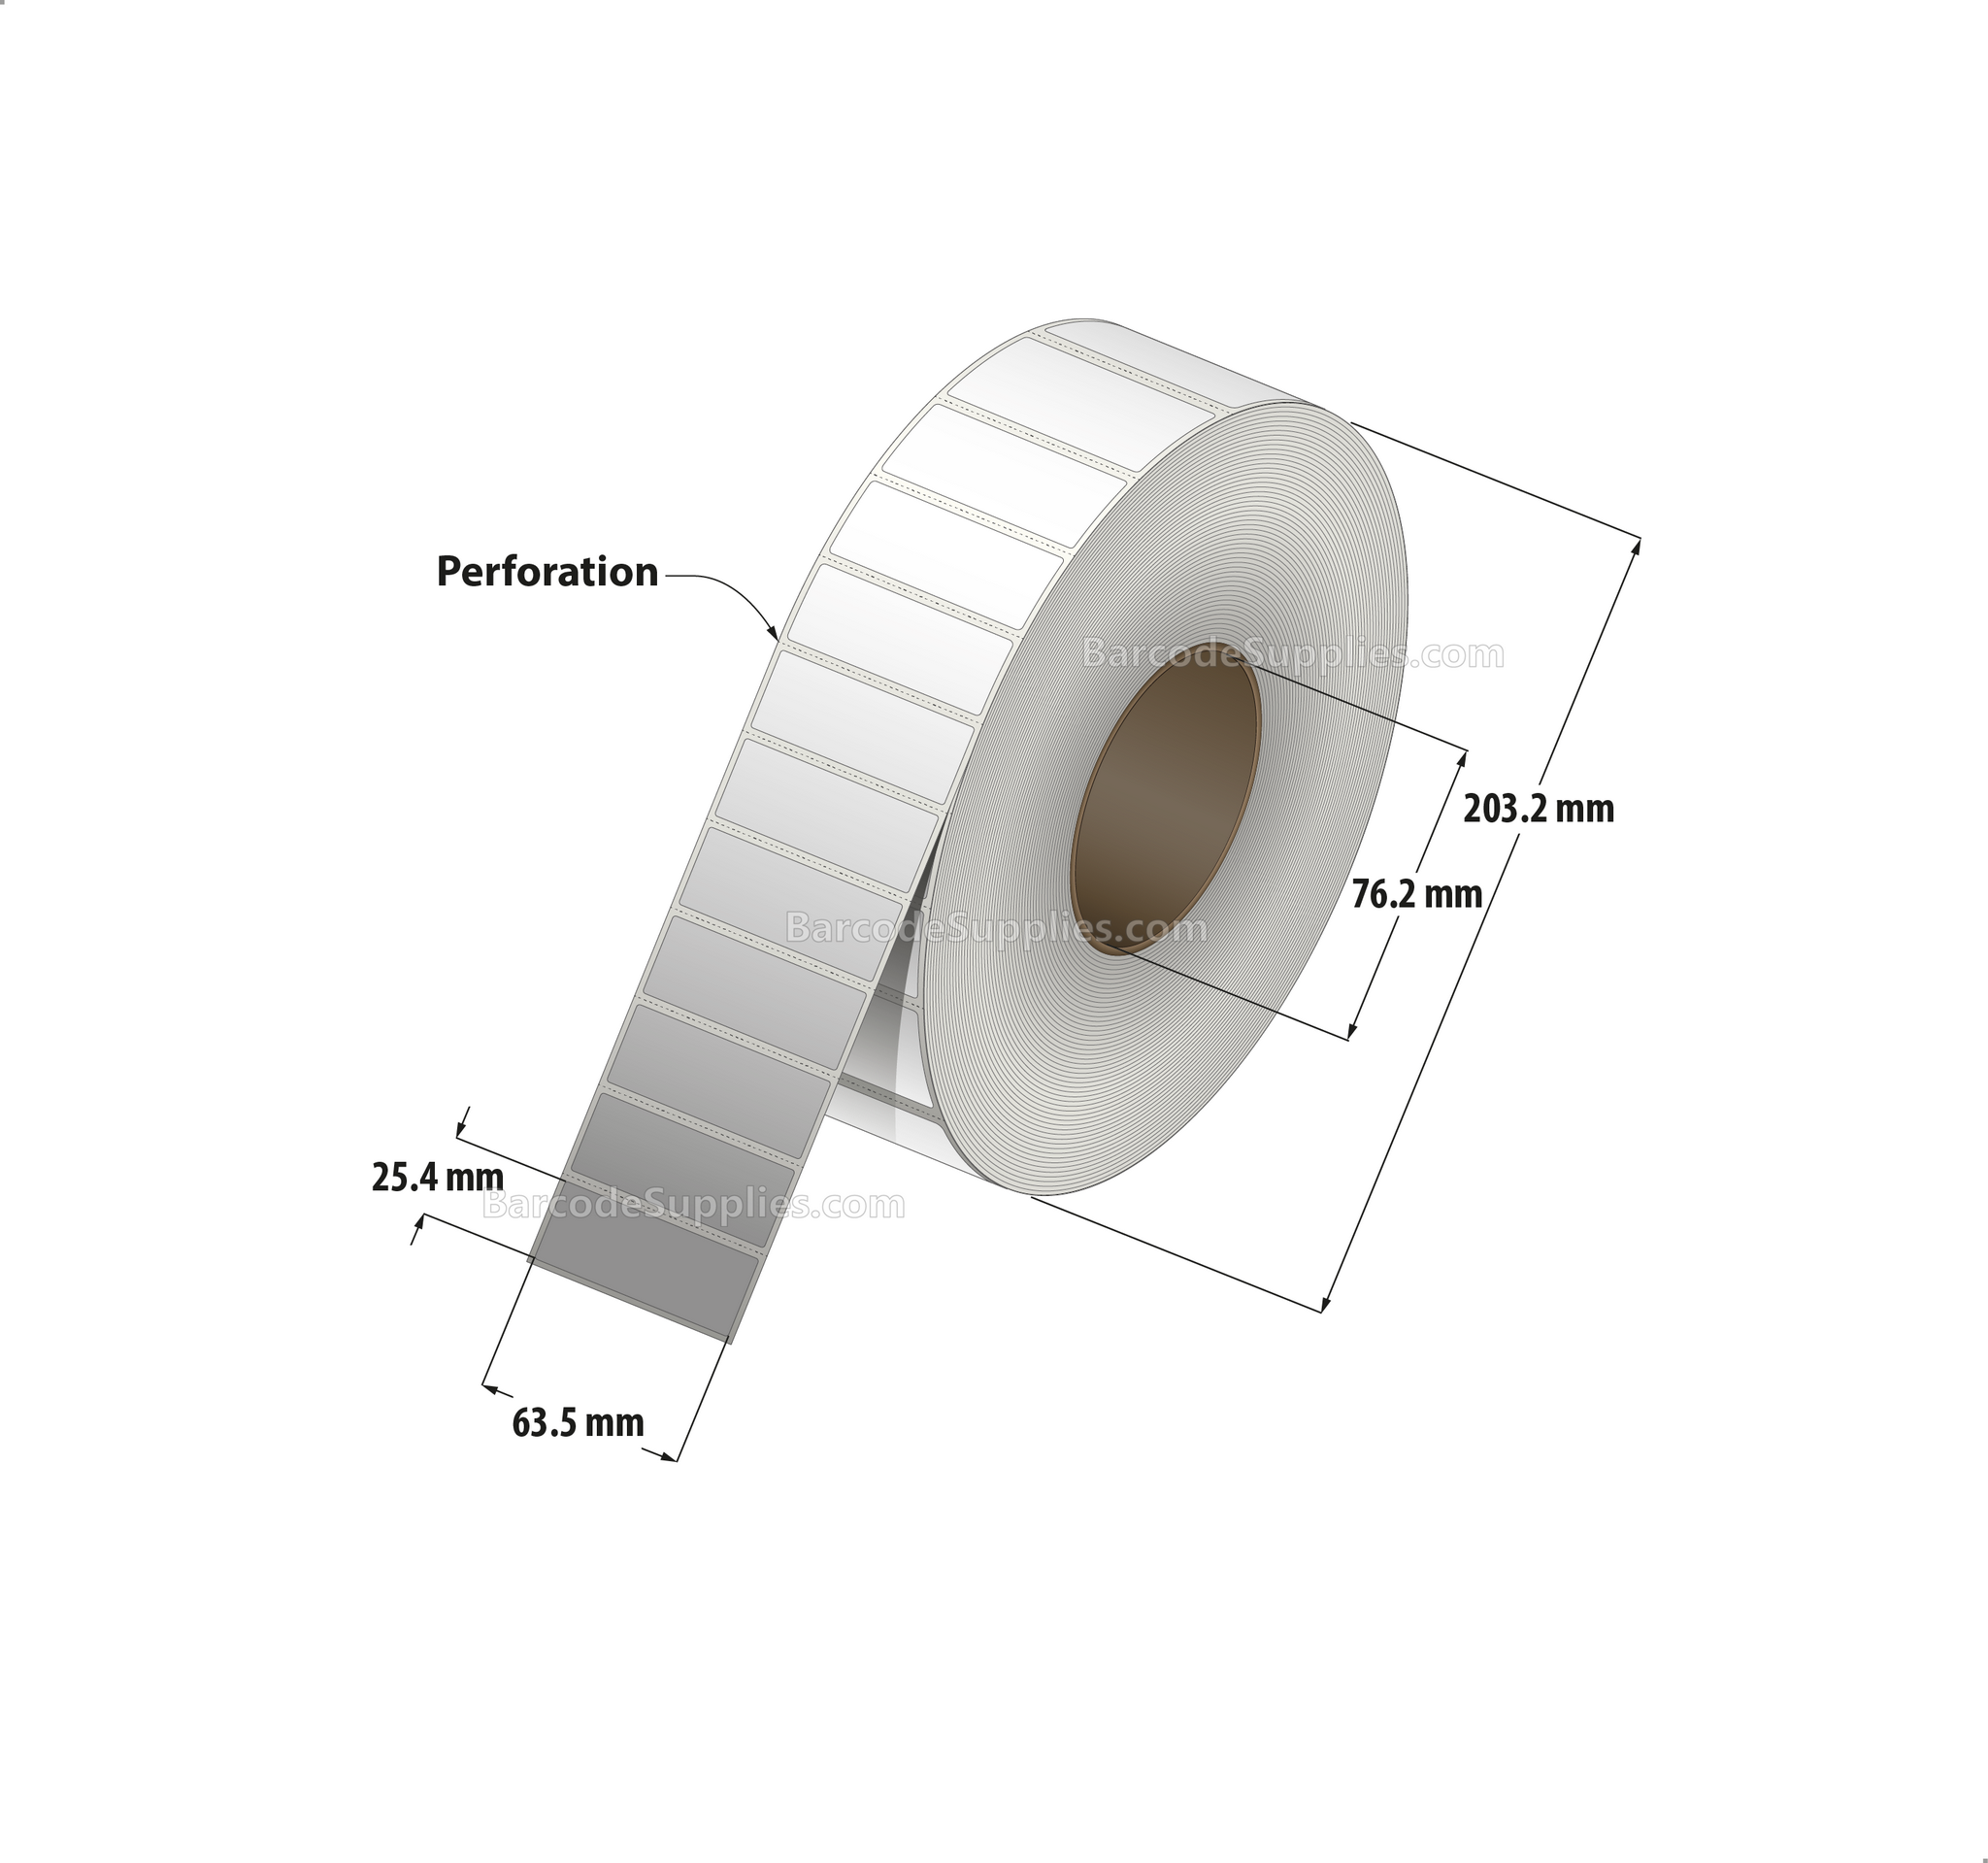 2.5 x 1 Direct Thermal White Labels With Acrylic Adhesive - Perforated - 5500 Labels Per Roll - Carton Of 8 Rolls - 44000 Labels Total - MPN: RD-25-1-5500-3 - BarcodeSource, Inc.